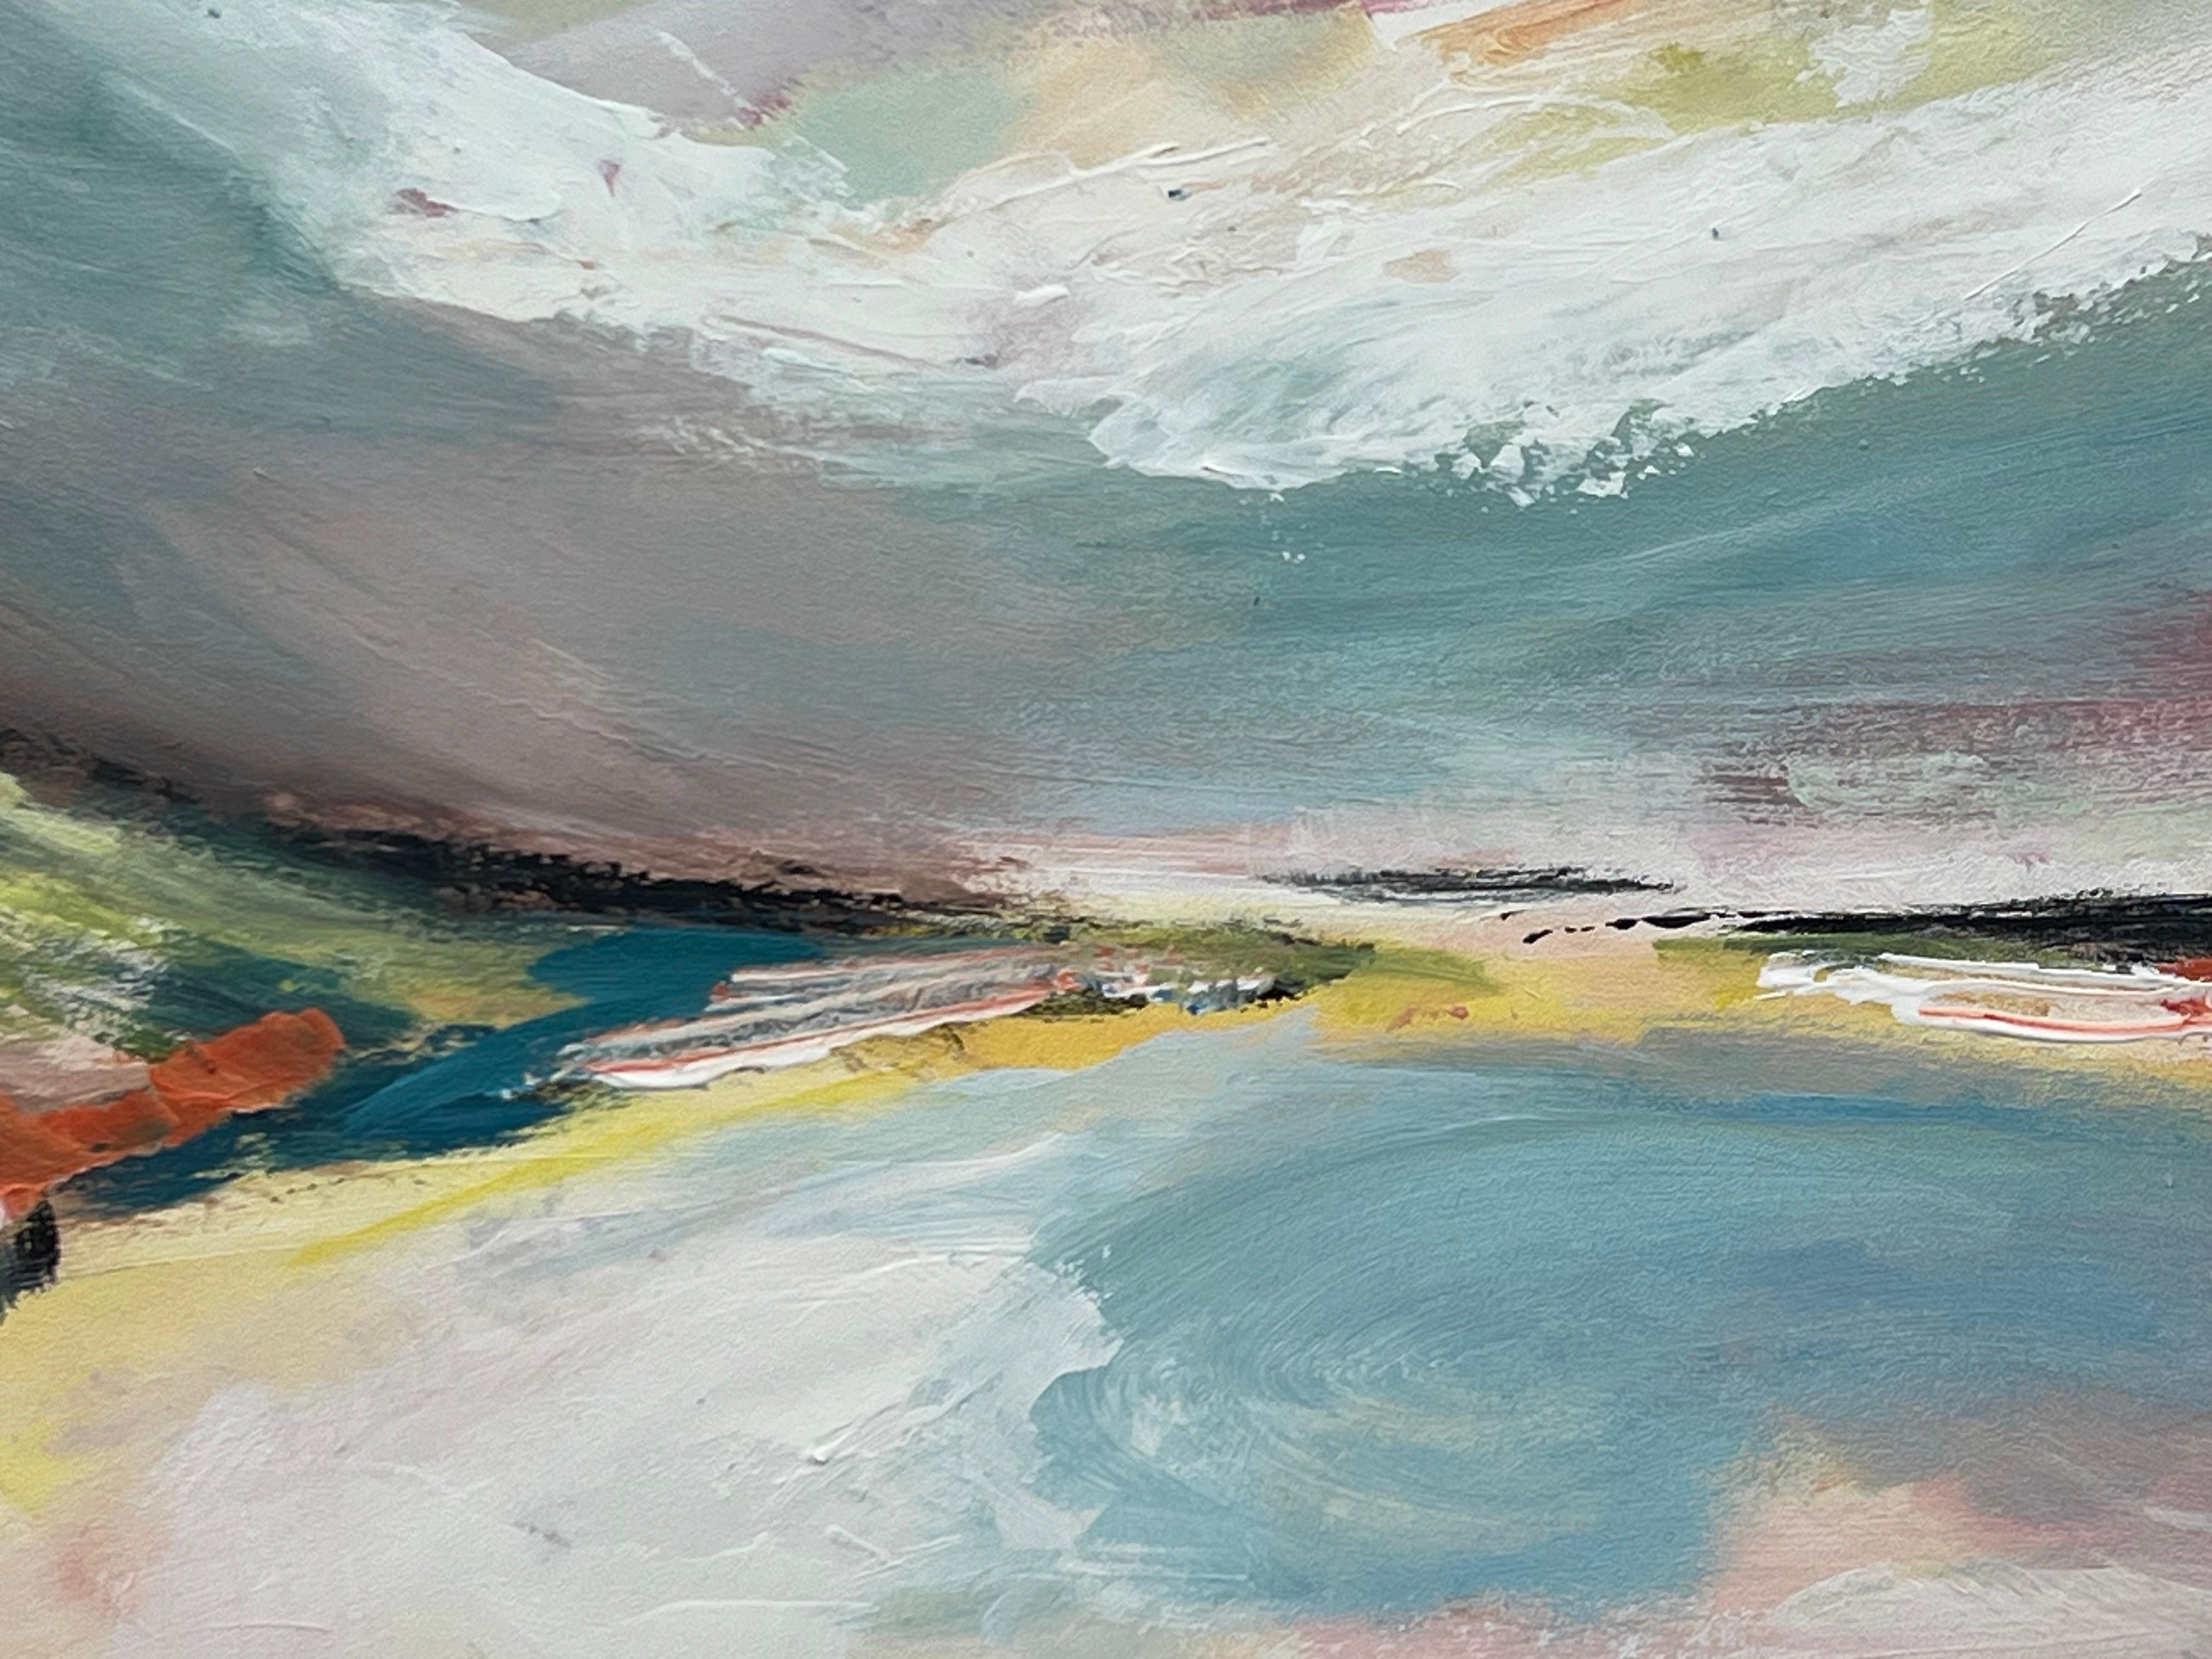 Abstract Landscape Seascape Art with Pink Blue & White Sky by British Artist For Sale 9